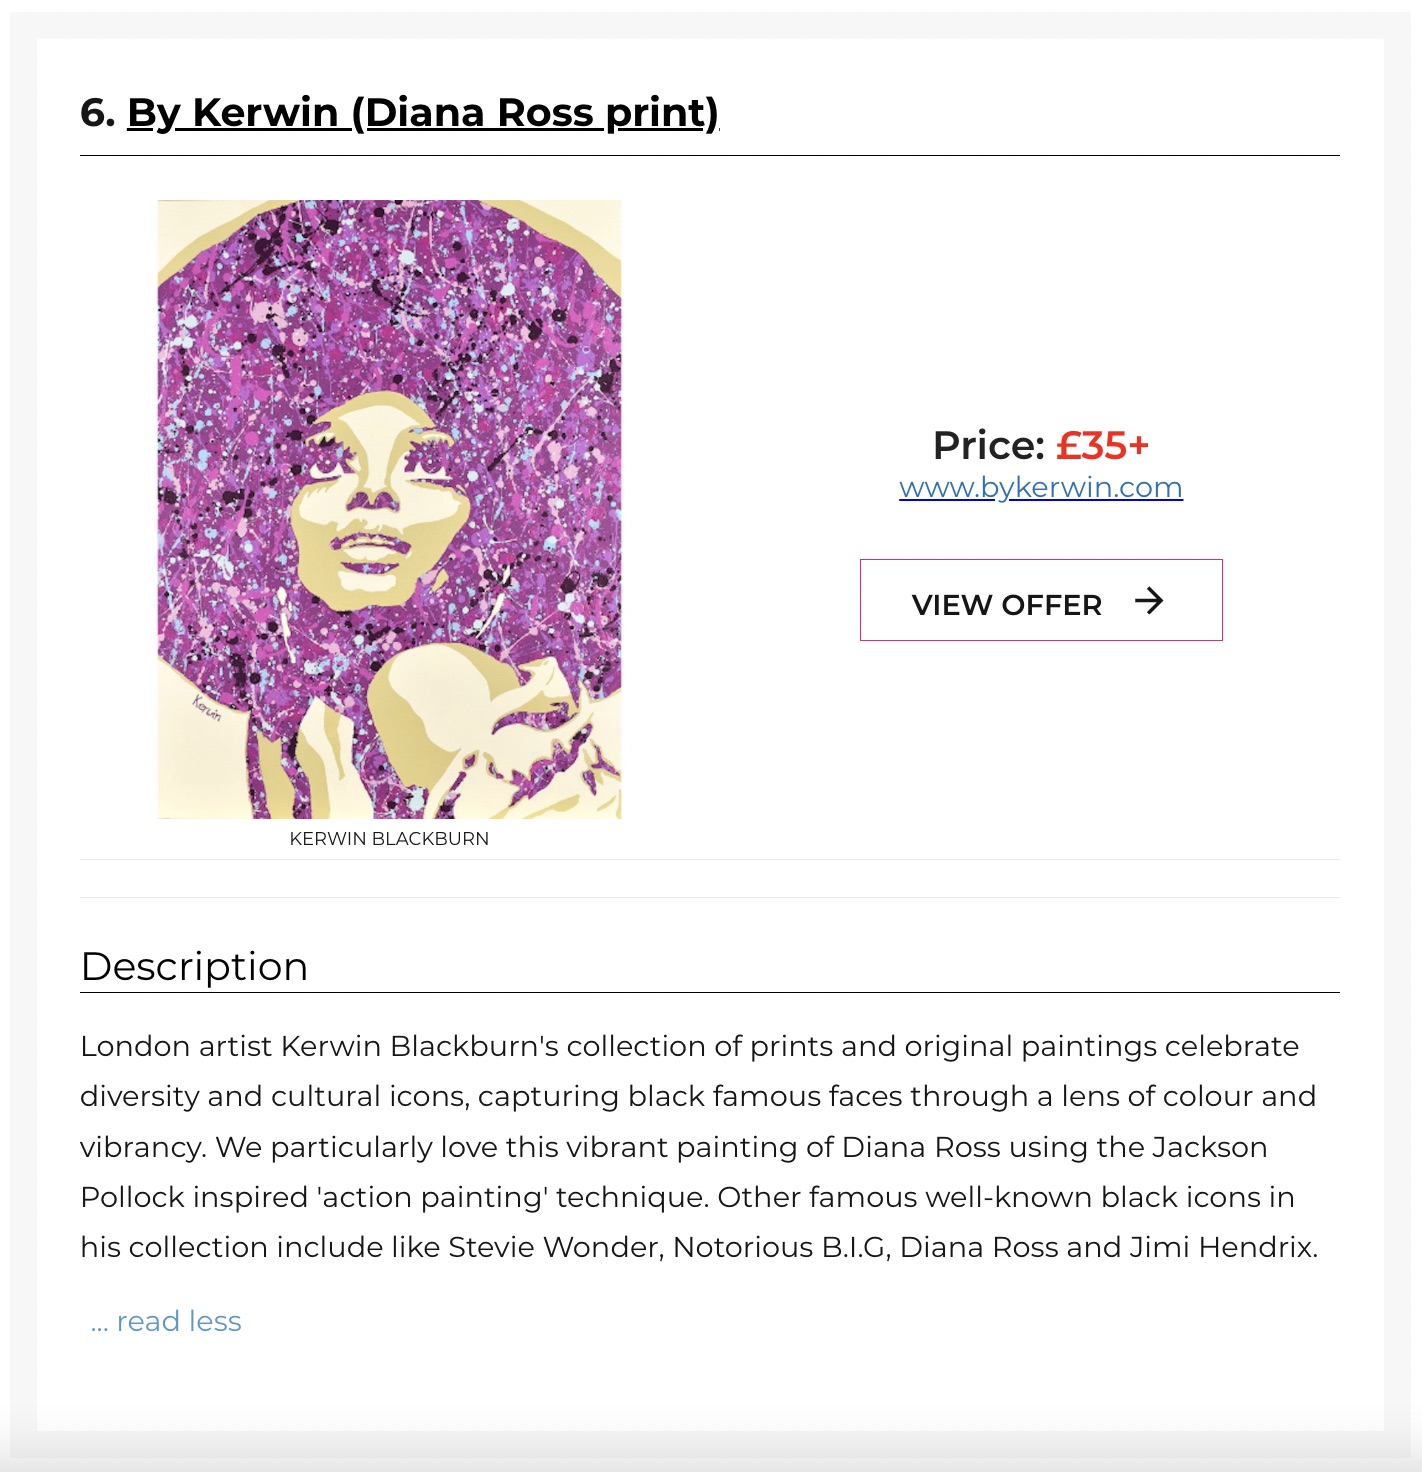 Diana Ross By Kerwin Closer Magazine feature 2022 | Music pop art paintings and poster prints